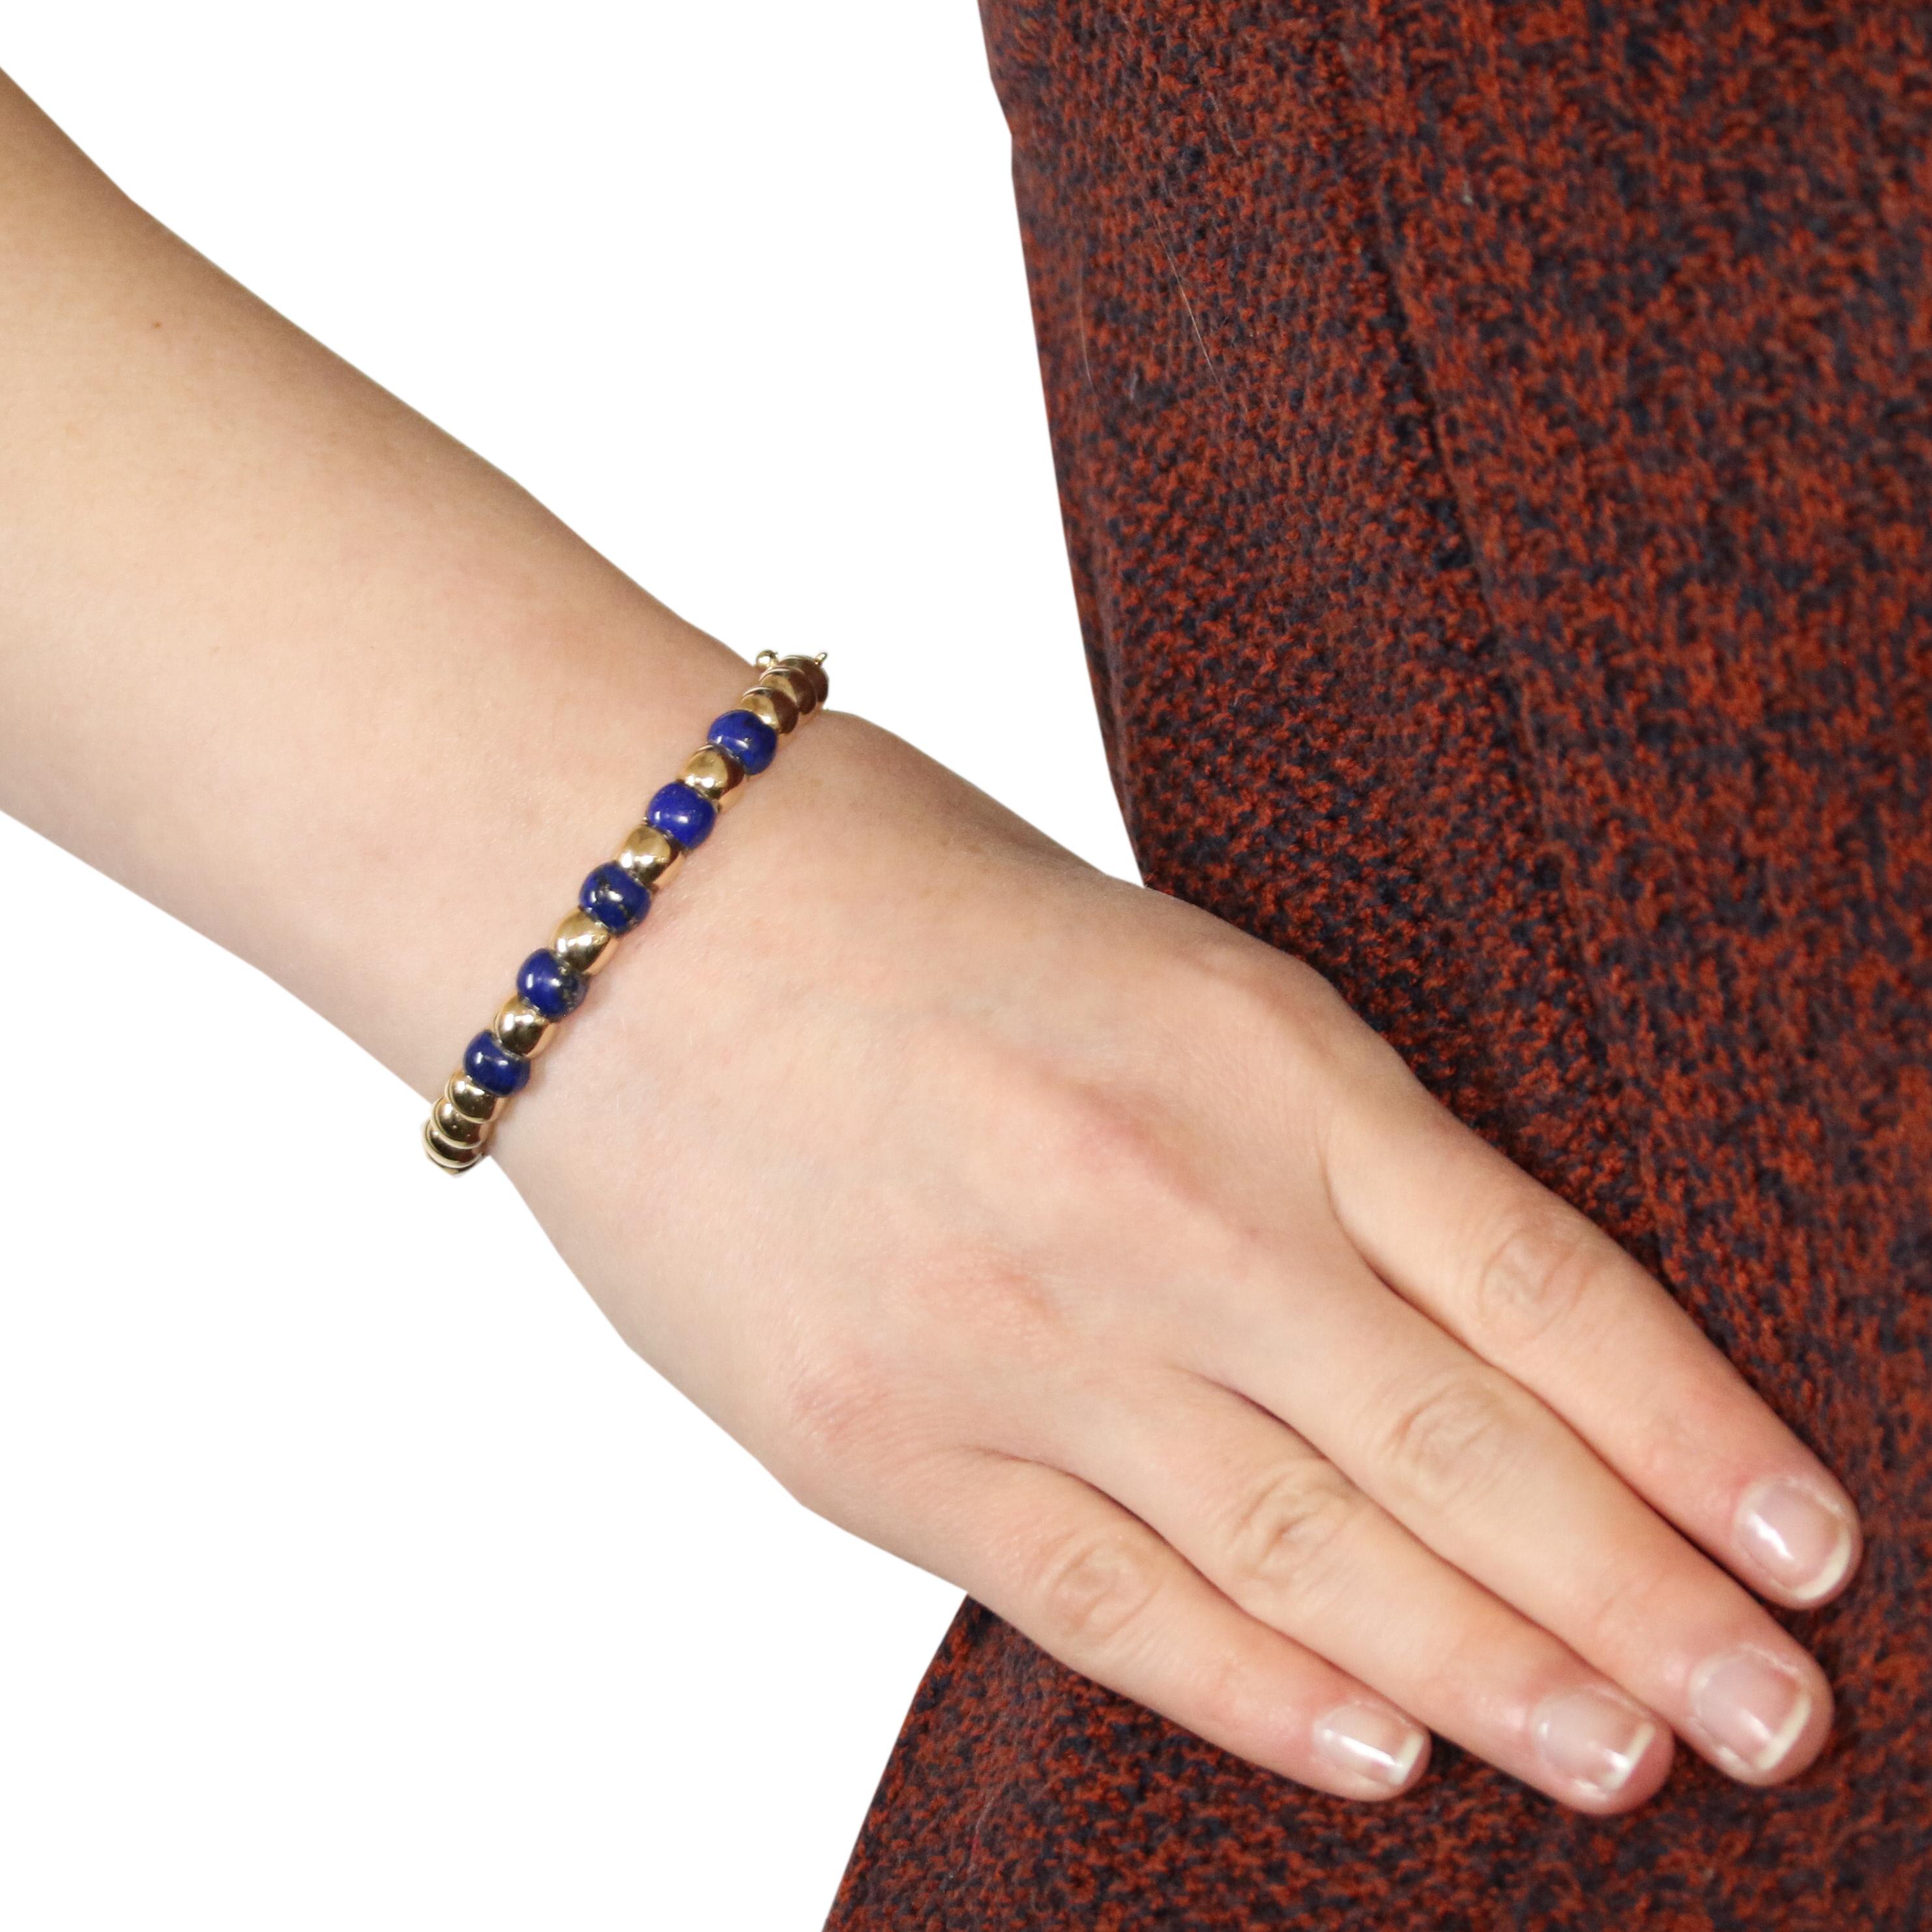 Brighten your wardrobe with a luxurious pop of color! Fashioned in an oval bangle style, this chic vintage bracelet showcases five rich blue lapis gemstones set in polished 14k yellow gold.   

Era: Vintage

Metal Content: Guaranteed 14k Gold as